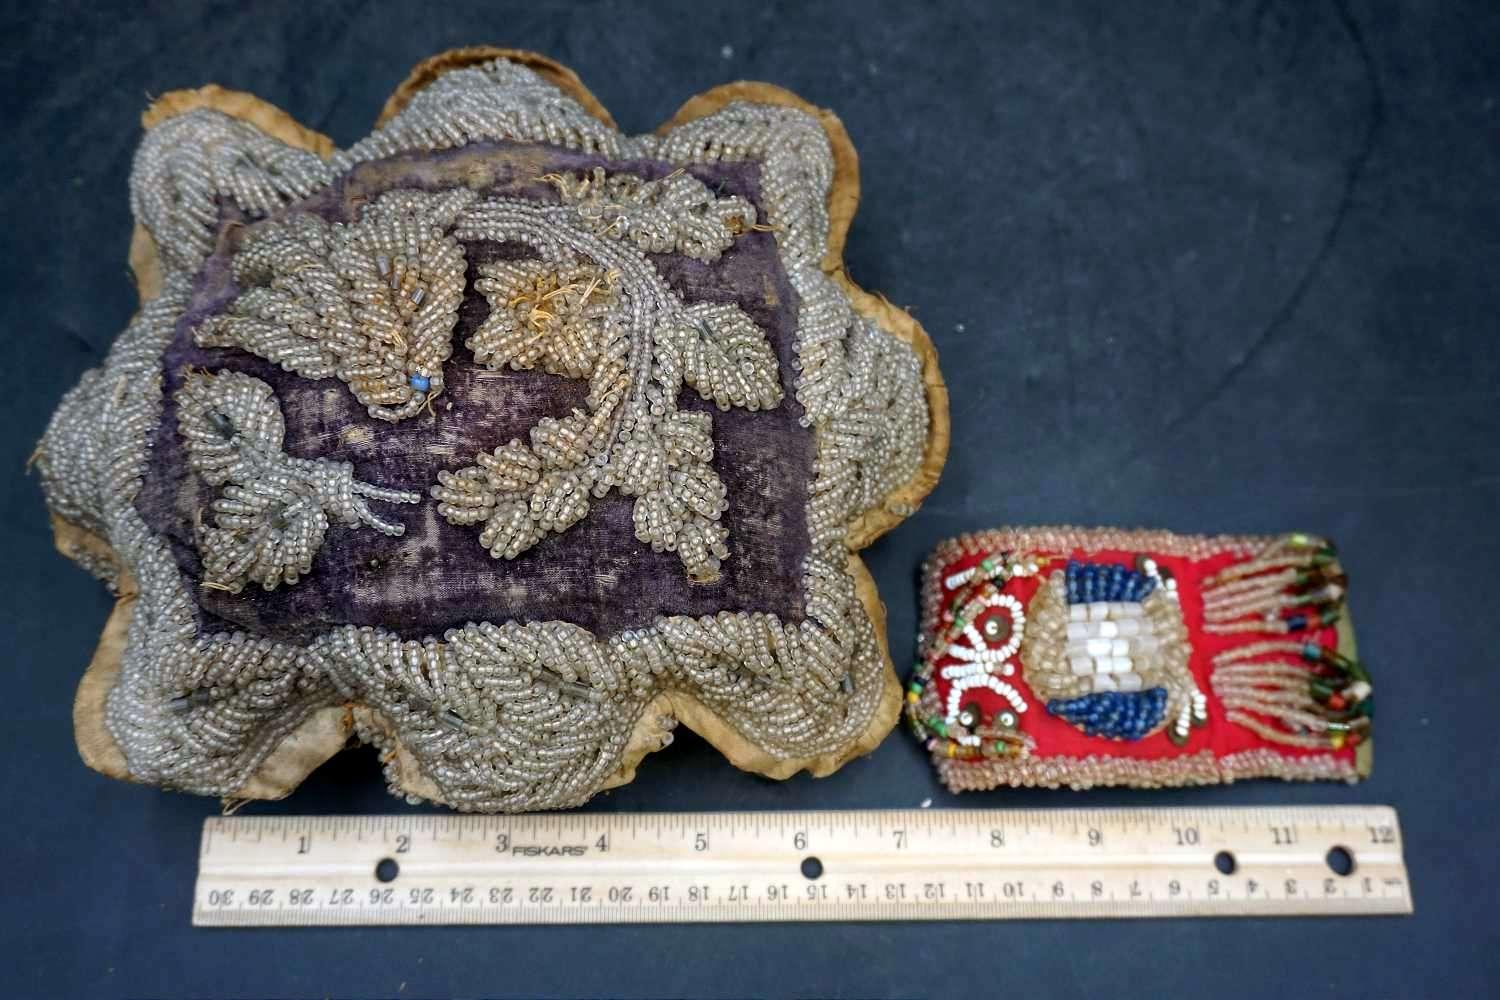 Ornate beadwork, Native American? The pillow item on the left is torn and leaking what looks like sa